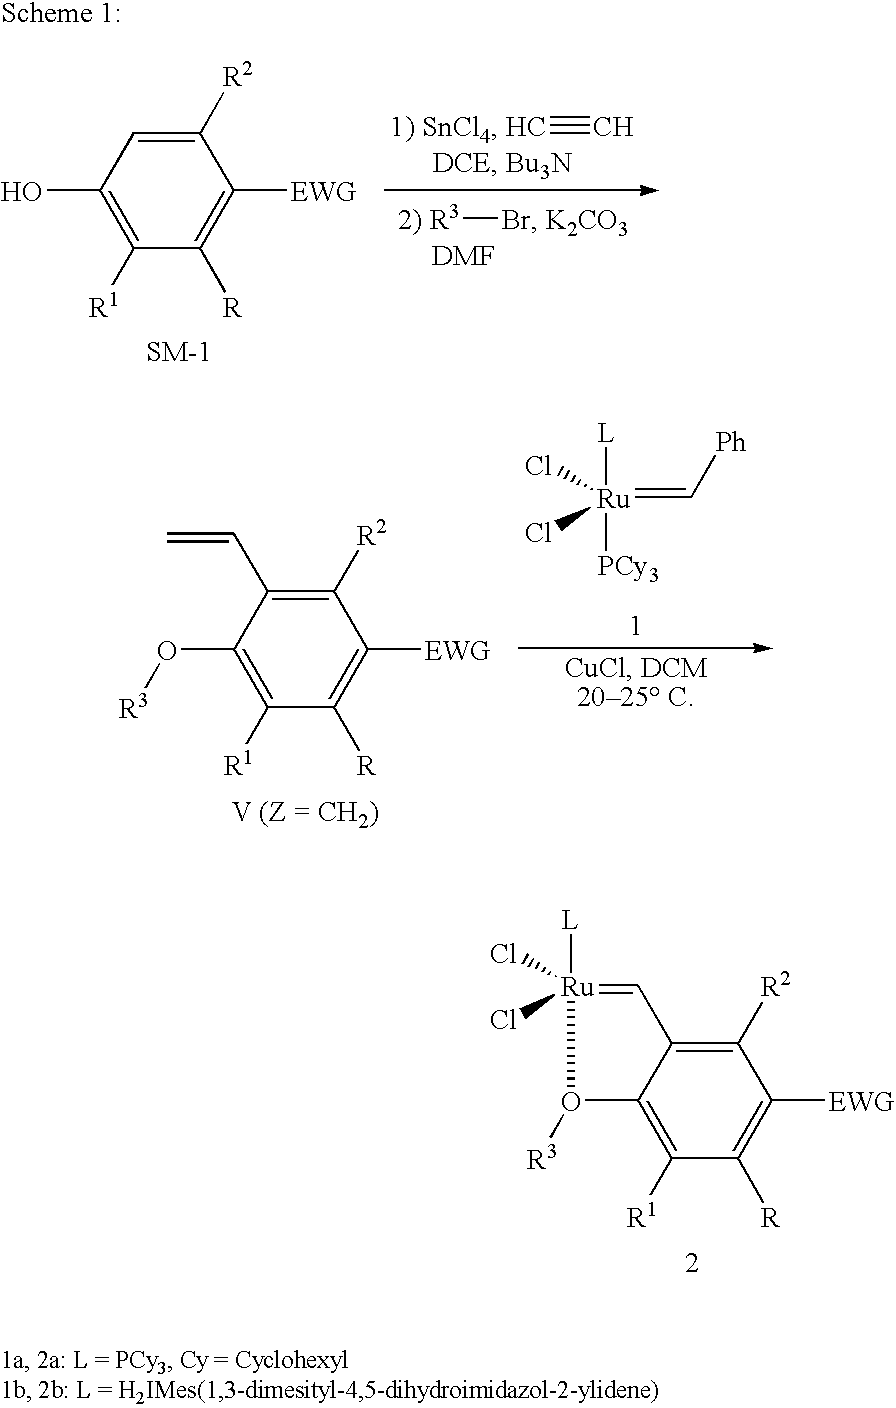 Recyclable ruthenium catalysts for metathesis reactions